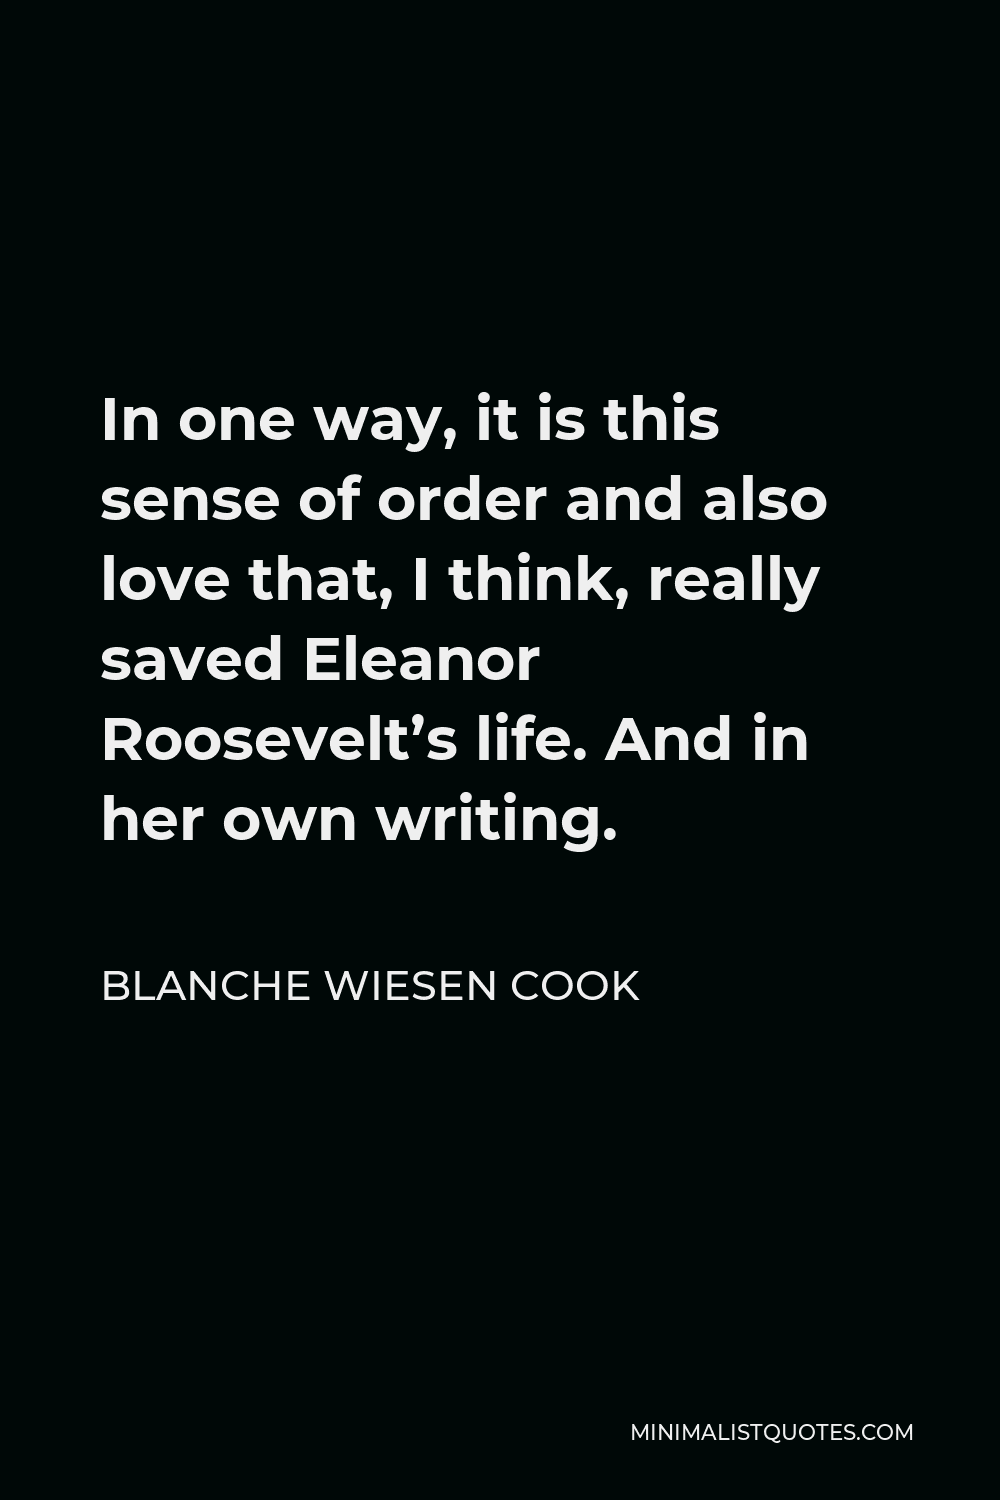 Blanche Wiesen Cook Quote - In one way, it is this sense of order and also love that, I think, really saved Eleanor Roosevelt’s life. And in her own writing.